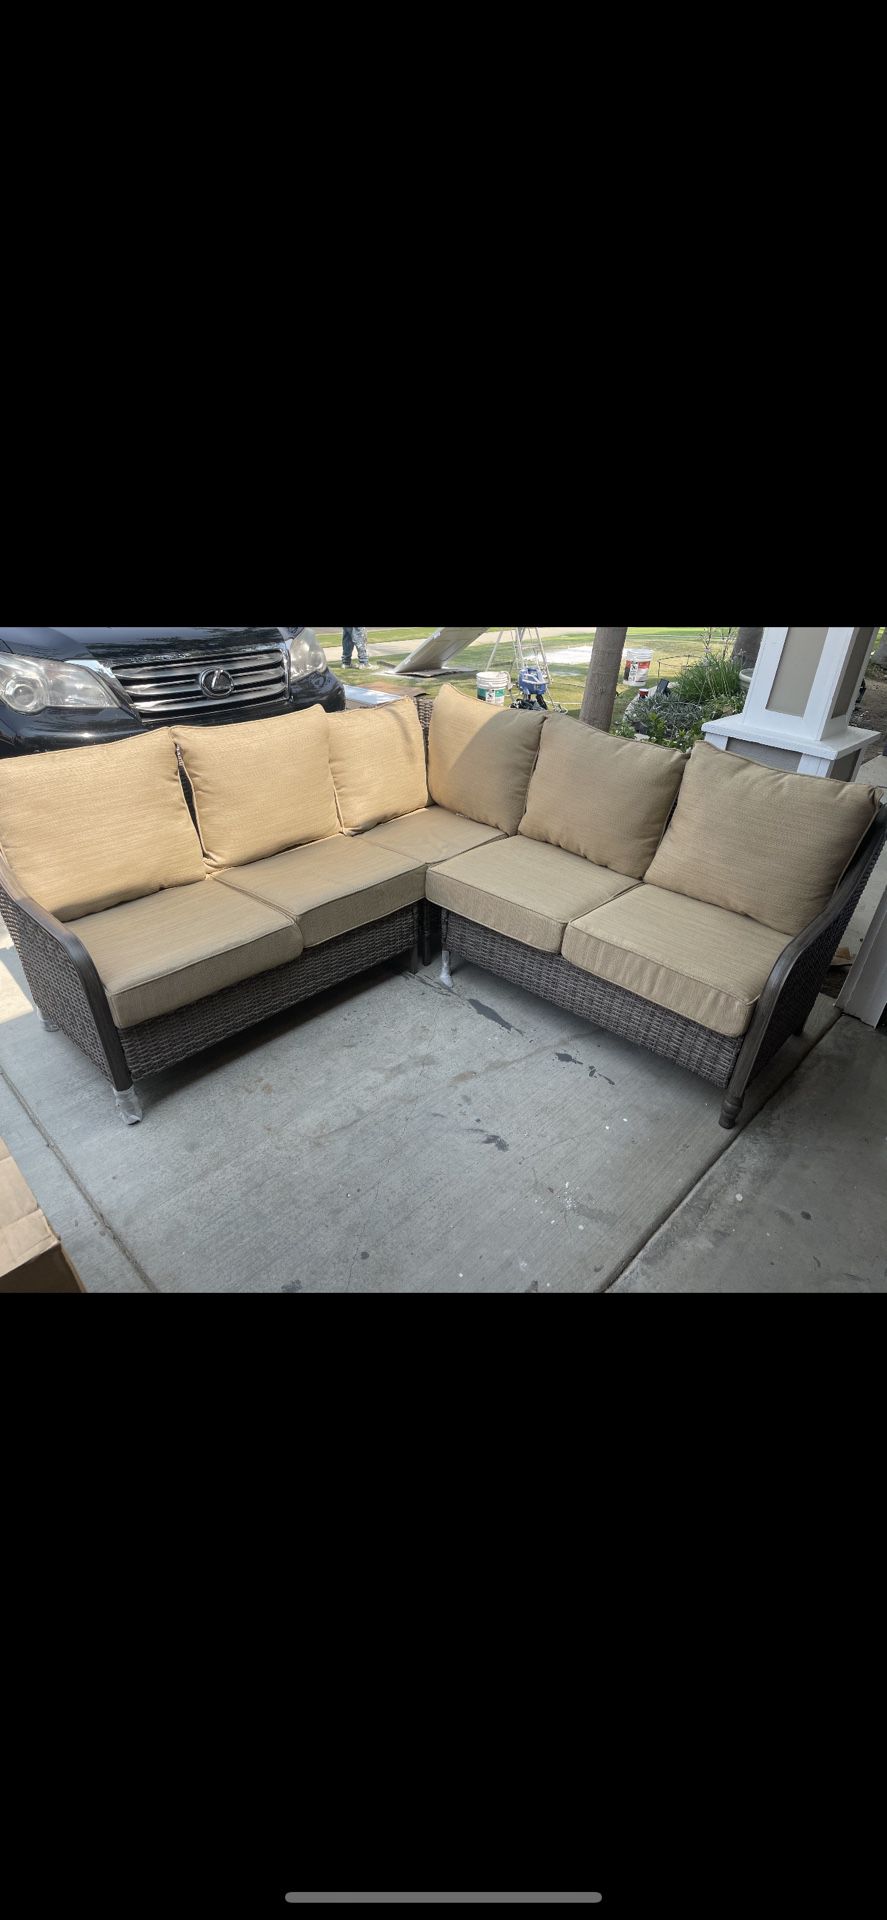 Windsor 3-Piece Brown Wicker Outdoor Patio Sectional Sofa with cushions